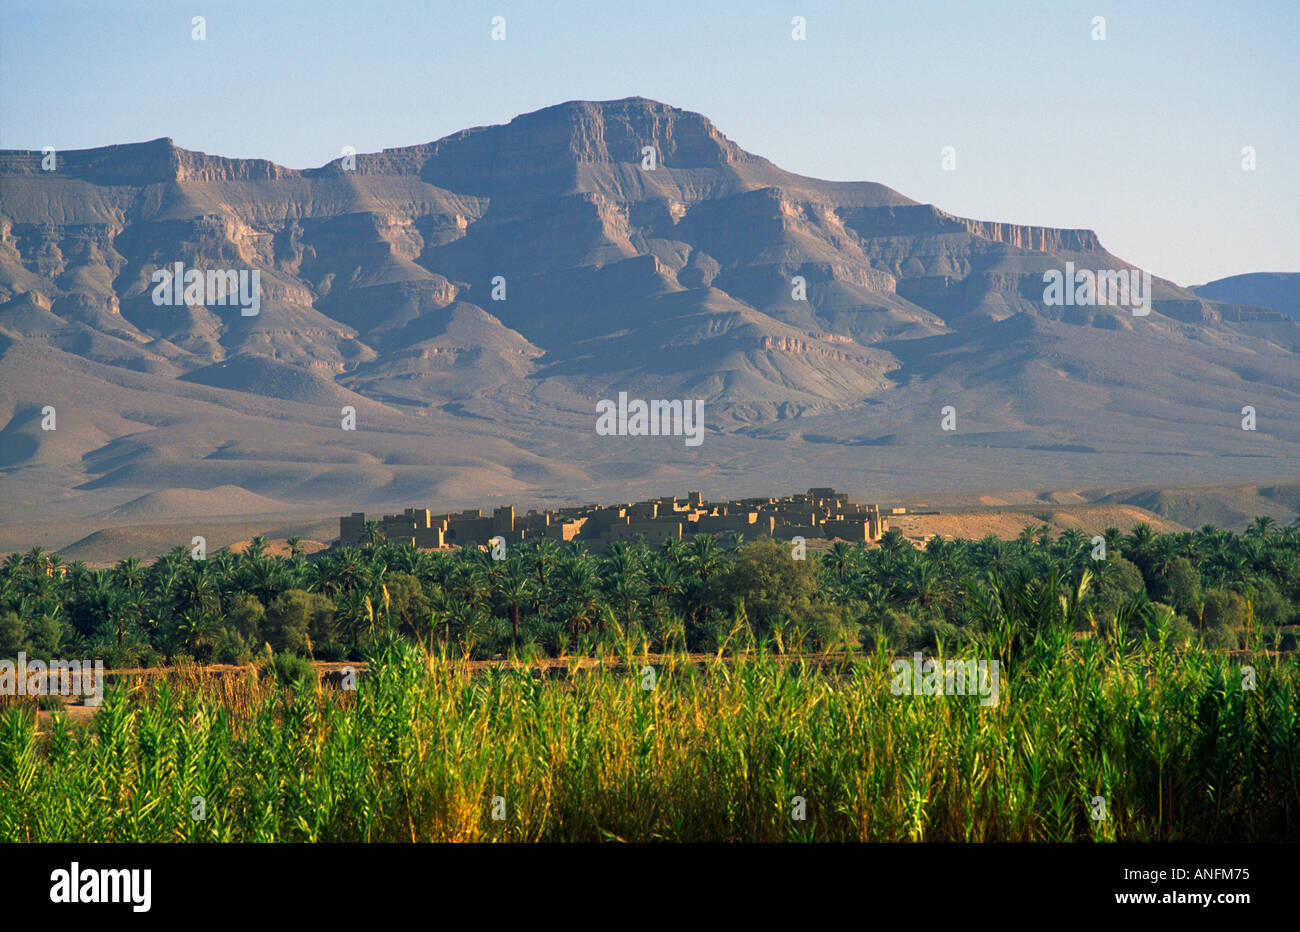 Oldmud-brick town above a palmerie in the Draa Valley. Southern Morocco Stock Photo